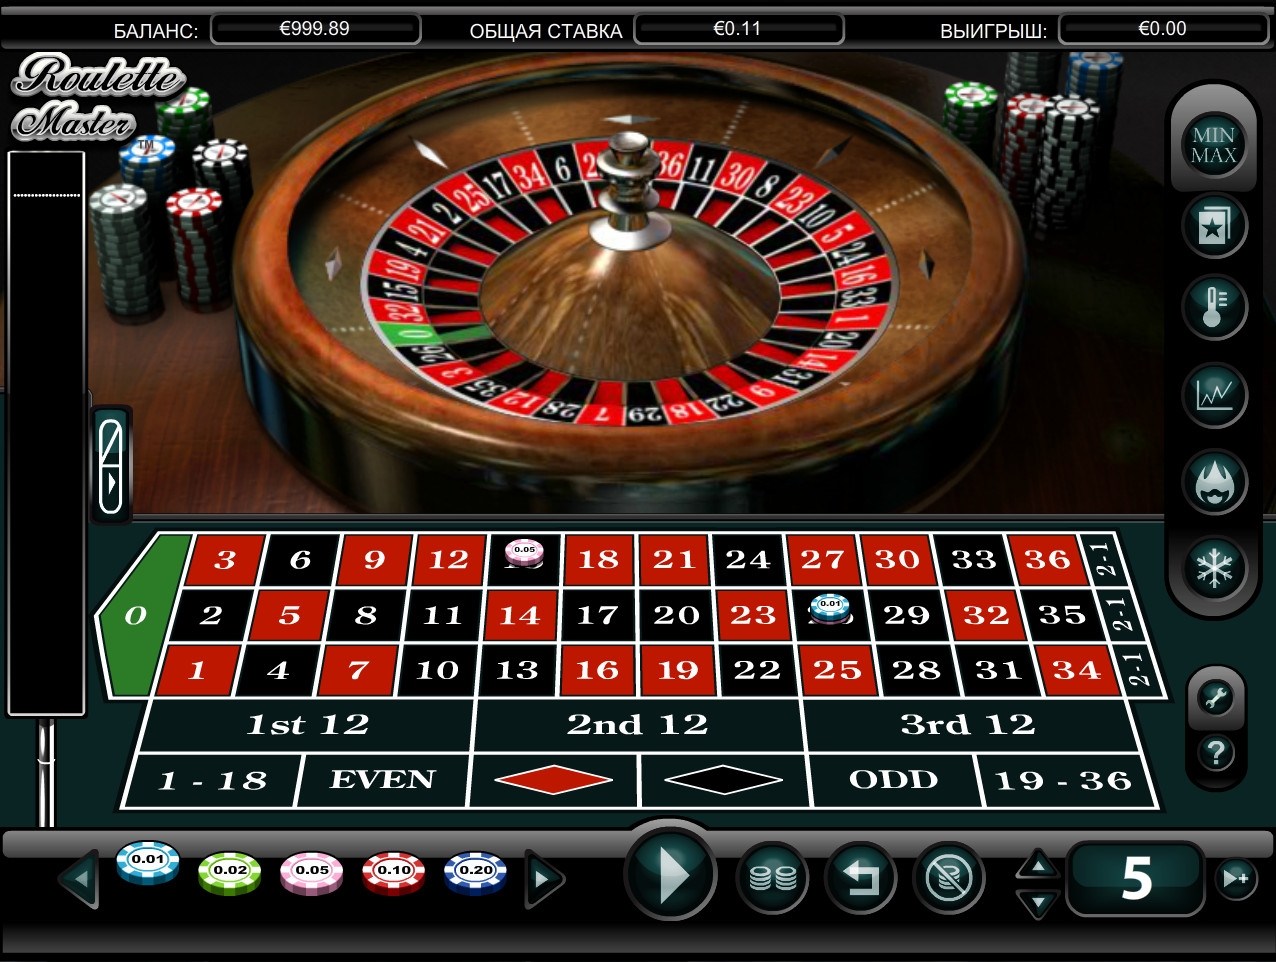 Roulette Master (Roulette Master) from category Roulette